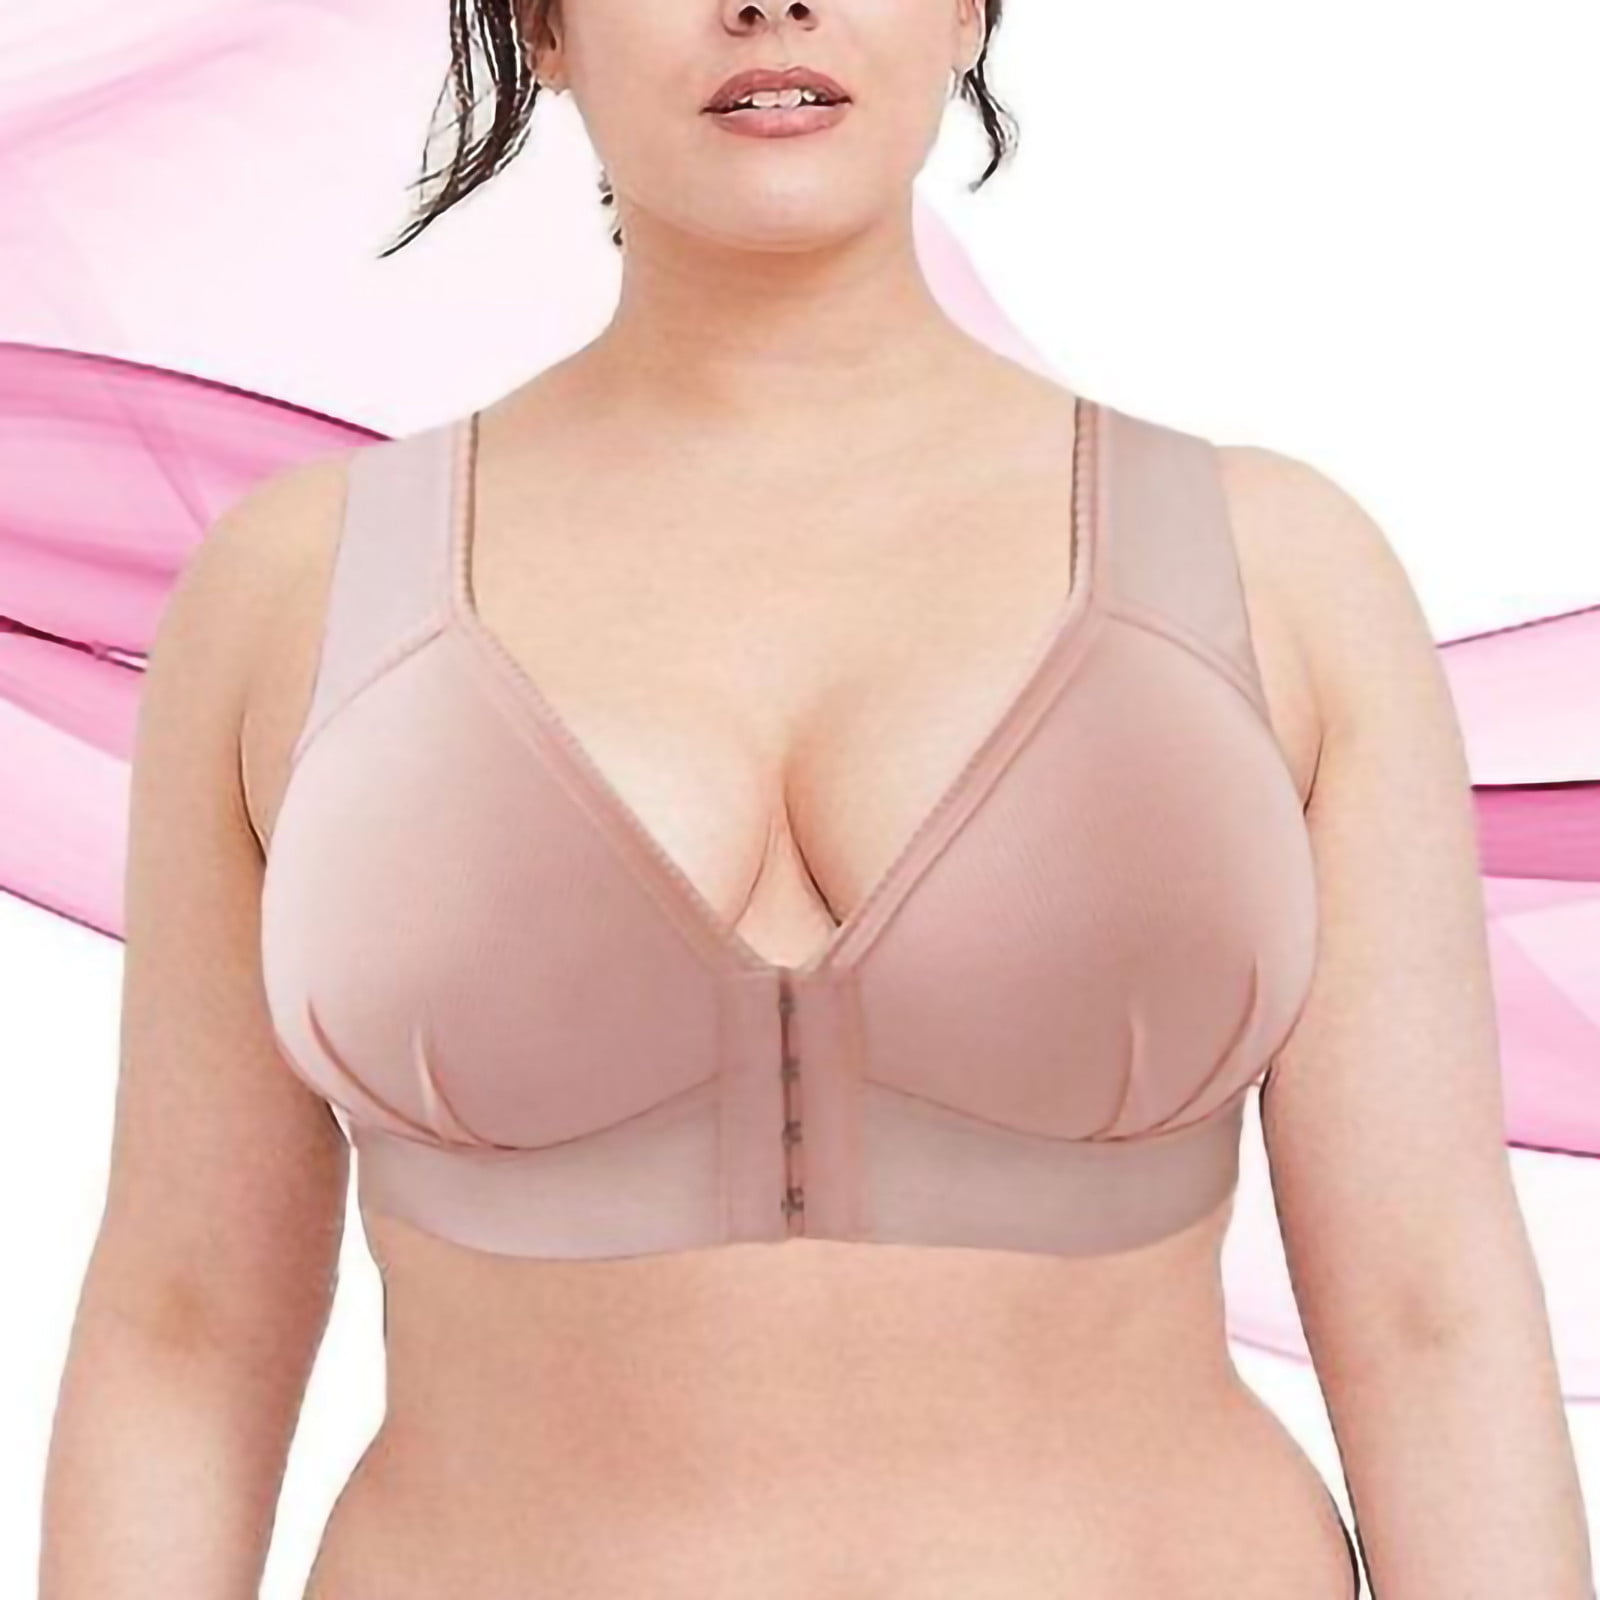 KDDYLITQ Front Closure Bras for Women Plus Size 58+6 Inch Chest Padded Front  Closure Bras for Women Plus Size 5 Plus Size Push Up Bras 42d Beige 3X 